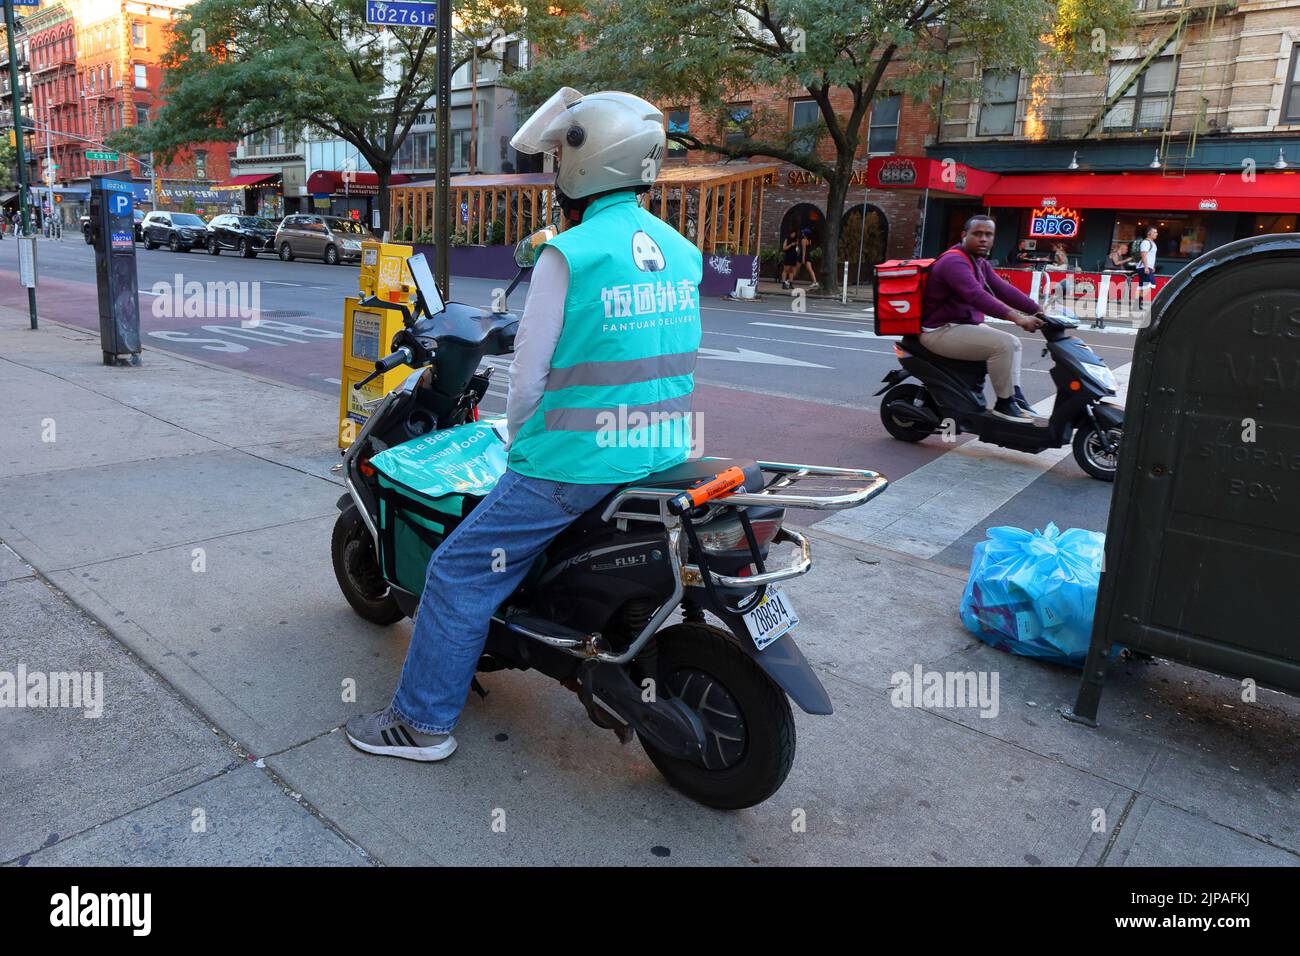 Fantuan Delivery und Grubhub Delivery Workers on Electric Mopeds in Manhattans East Village Nachbarschaft, New York City. 飯糰外賣 Food Delivery Gig Arbeiter. Stockfoto